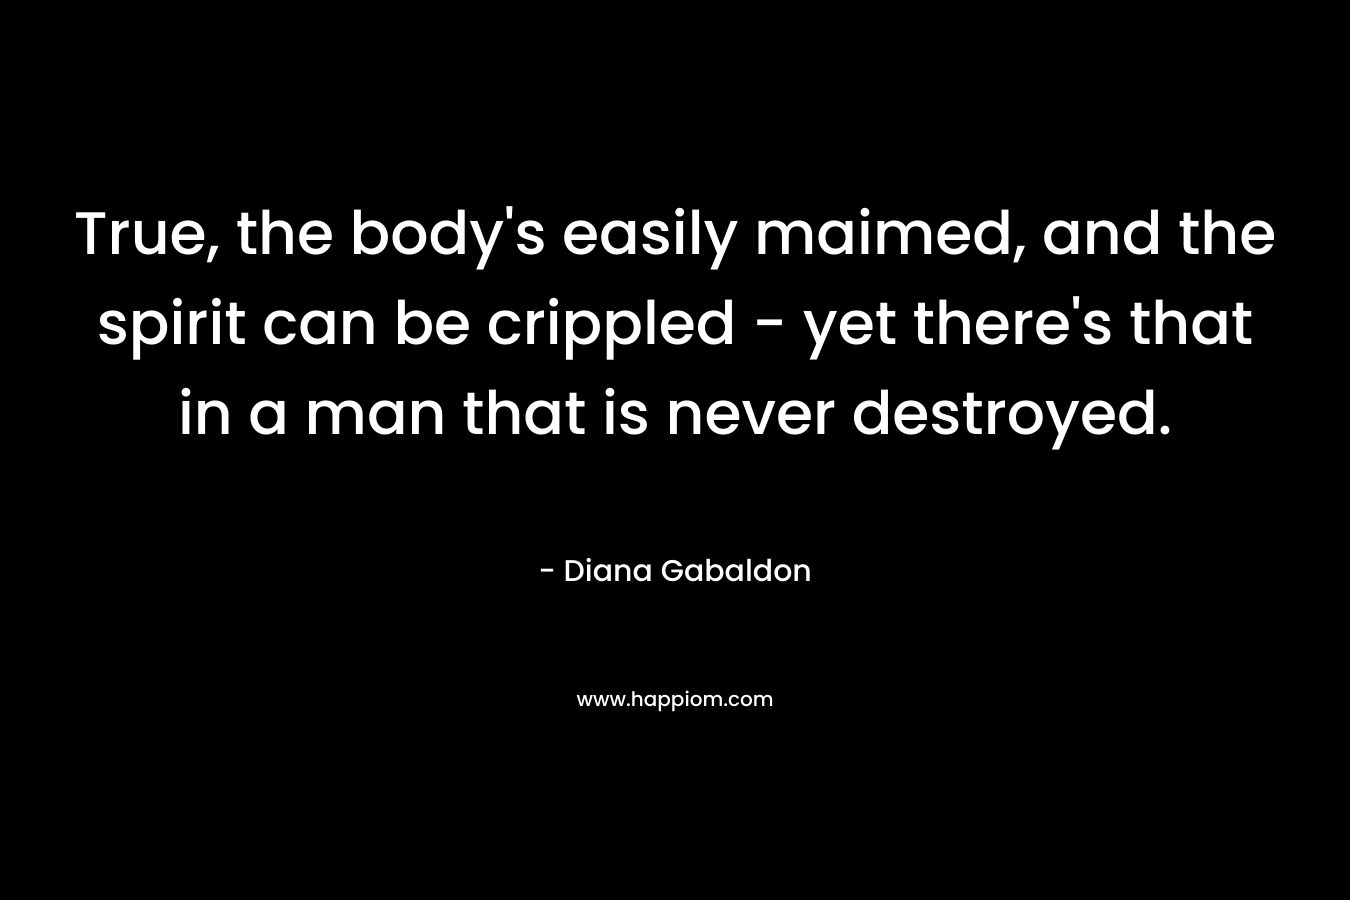 True, the body’s easily maimed, and the spirit can be crippled – yet there’s that in a man that is never destroyed. – Diana Gabaldon